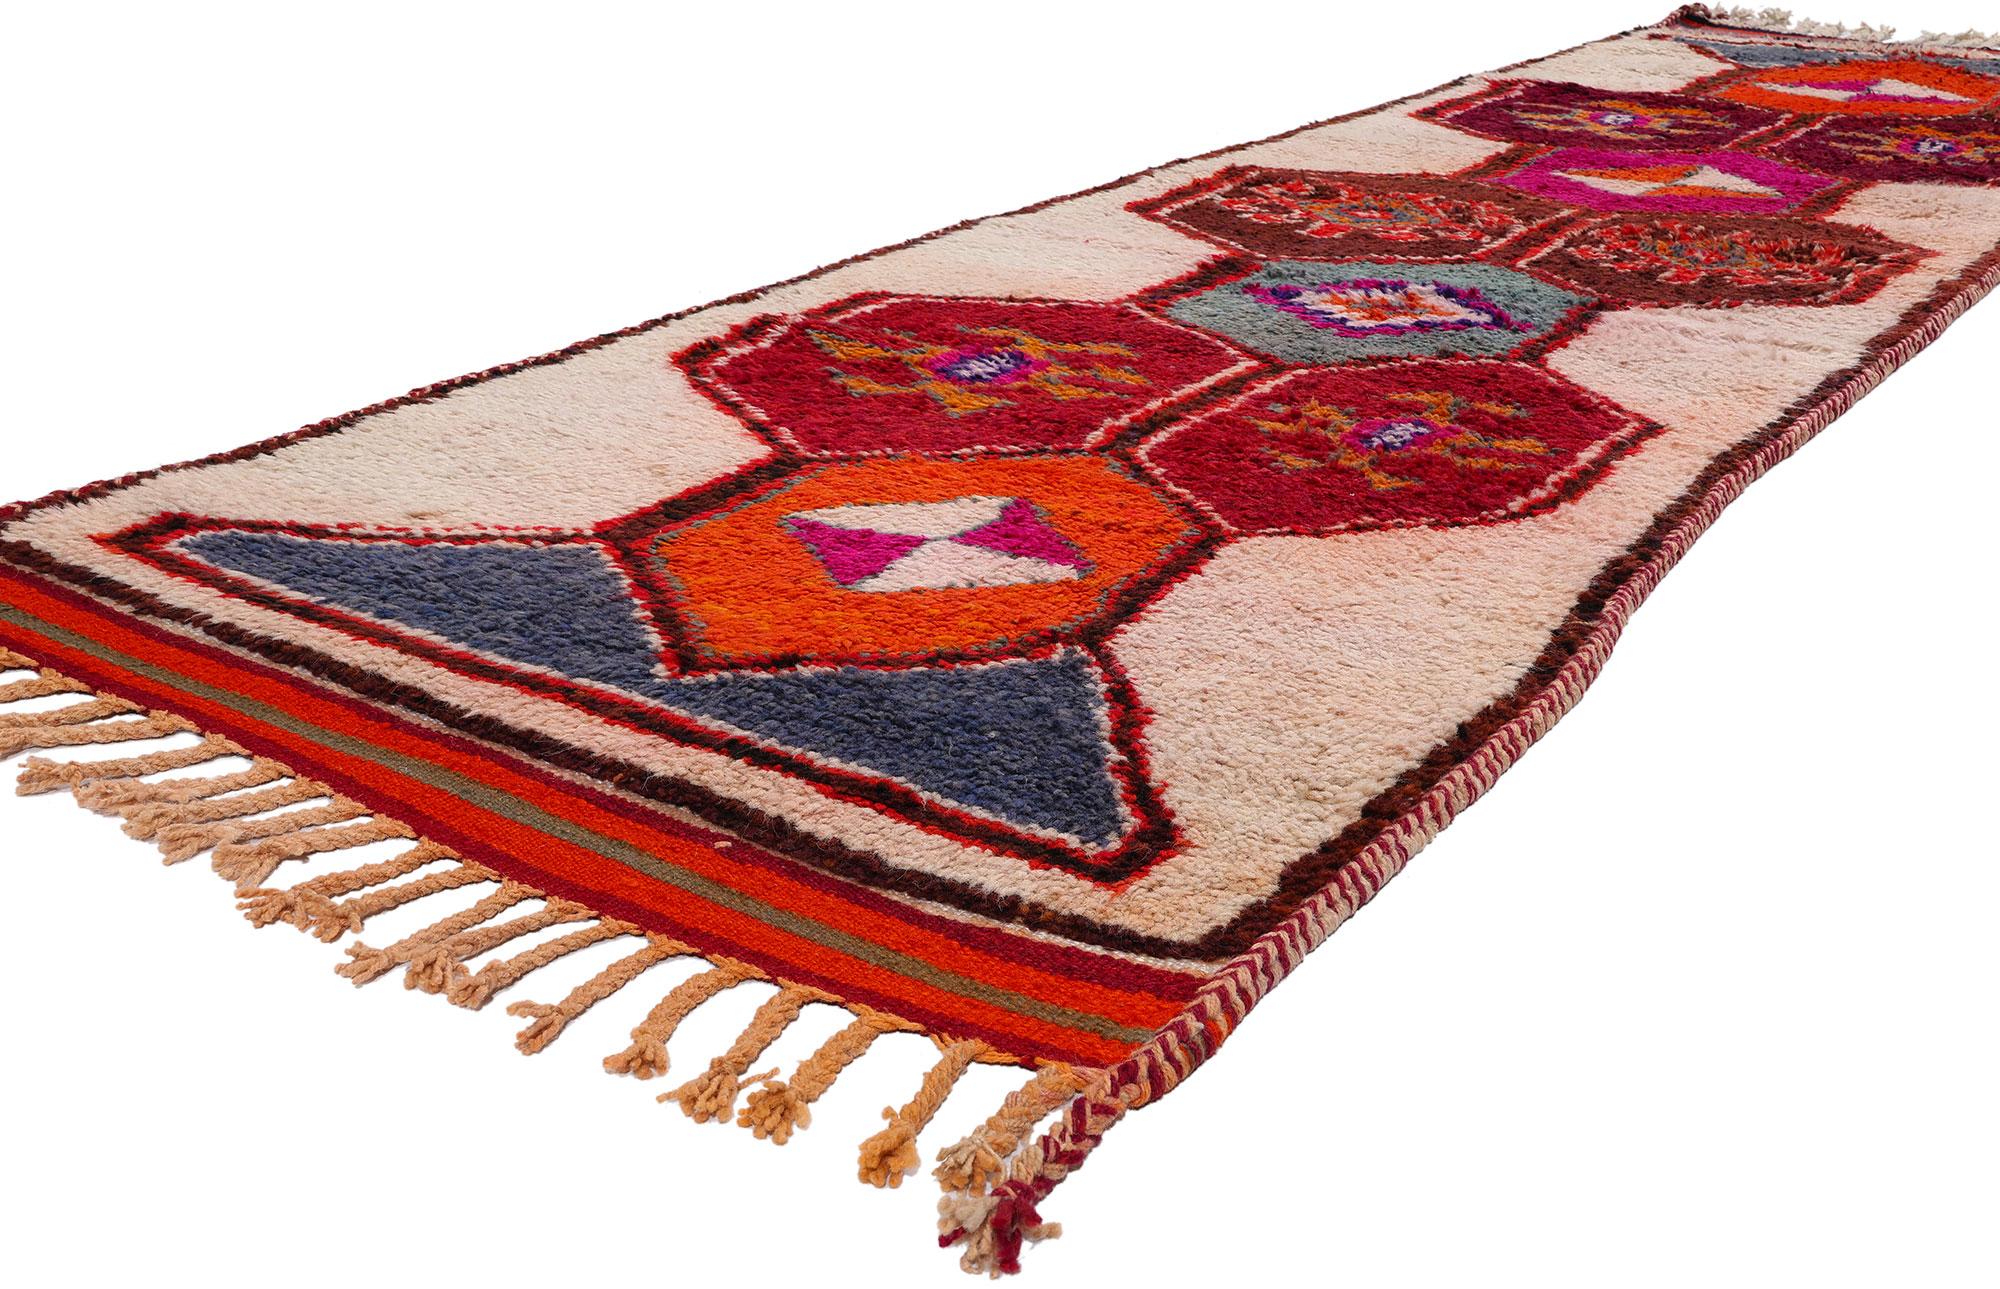 53894 Vintage Kurdish Tribal Rug Runner, 03'05 x 12'00. Kurdish rugs, meticulously fashioned by Kurdish Herki tribes in eastern Turkey, particularly in the Hakkari province, showcase unique geometric patterns and a vibrant palette of colors. Crafted